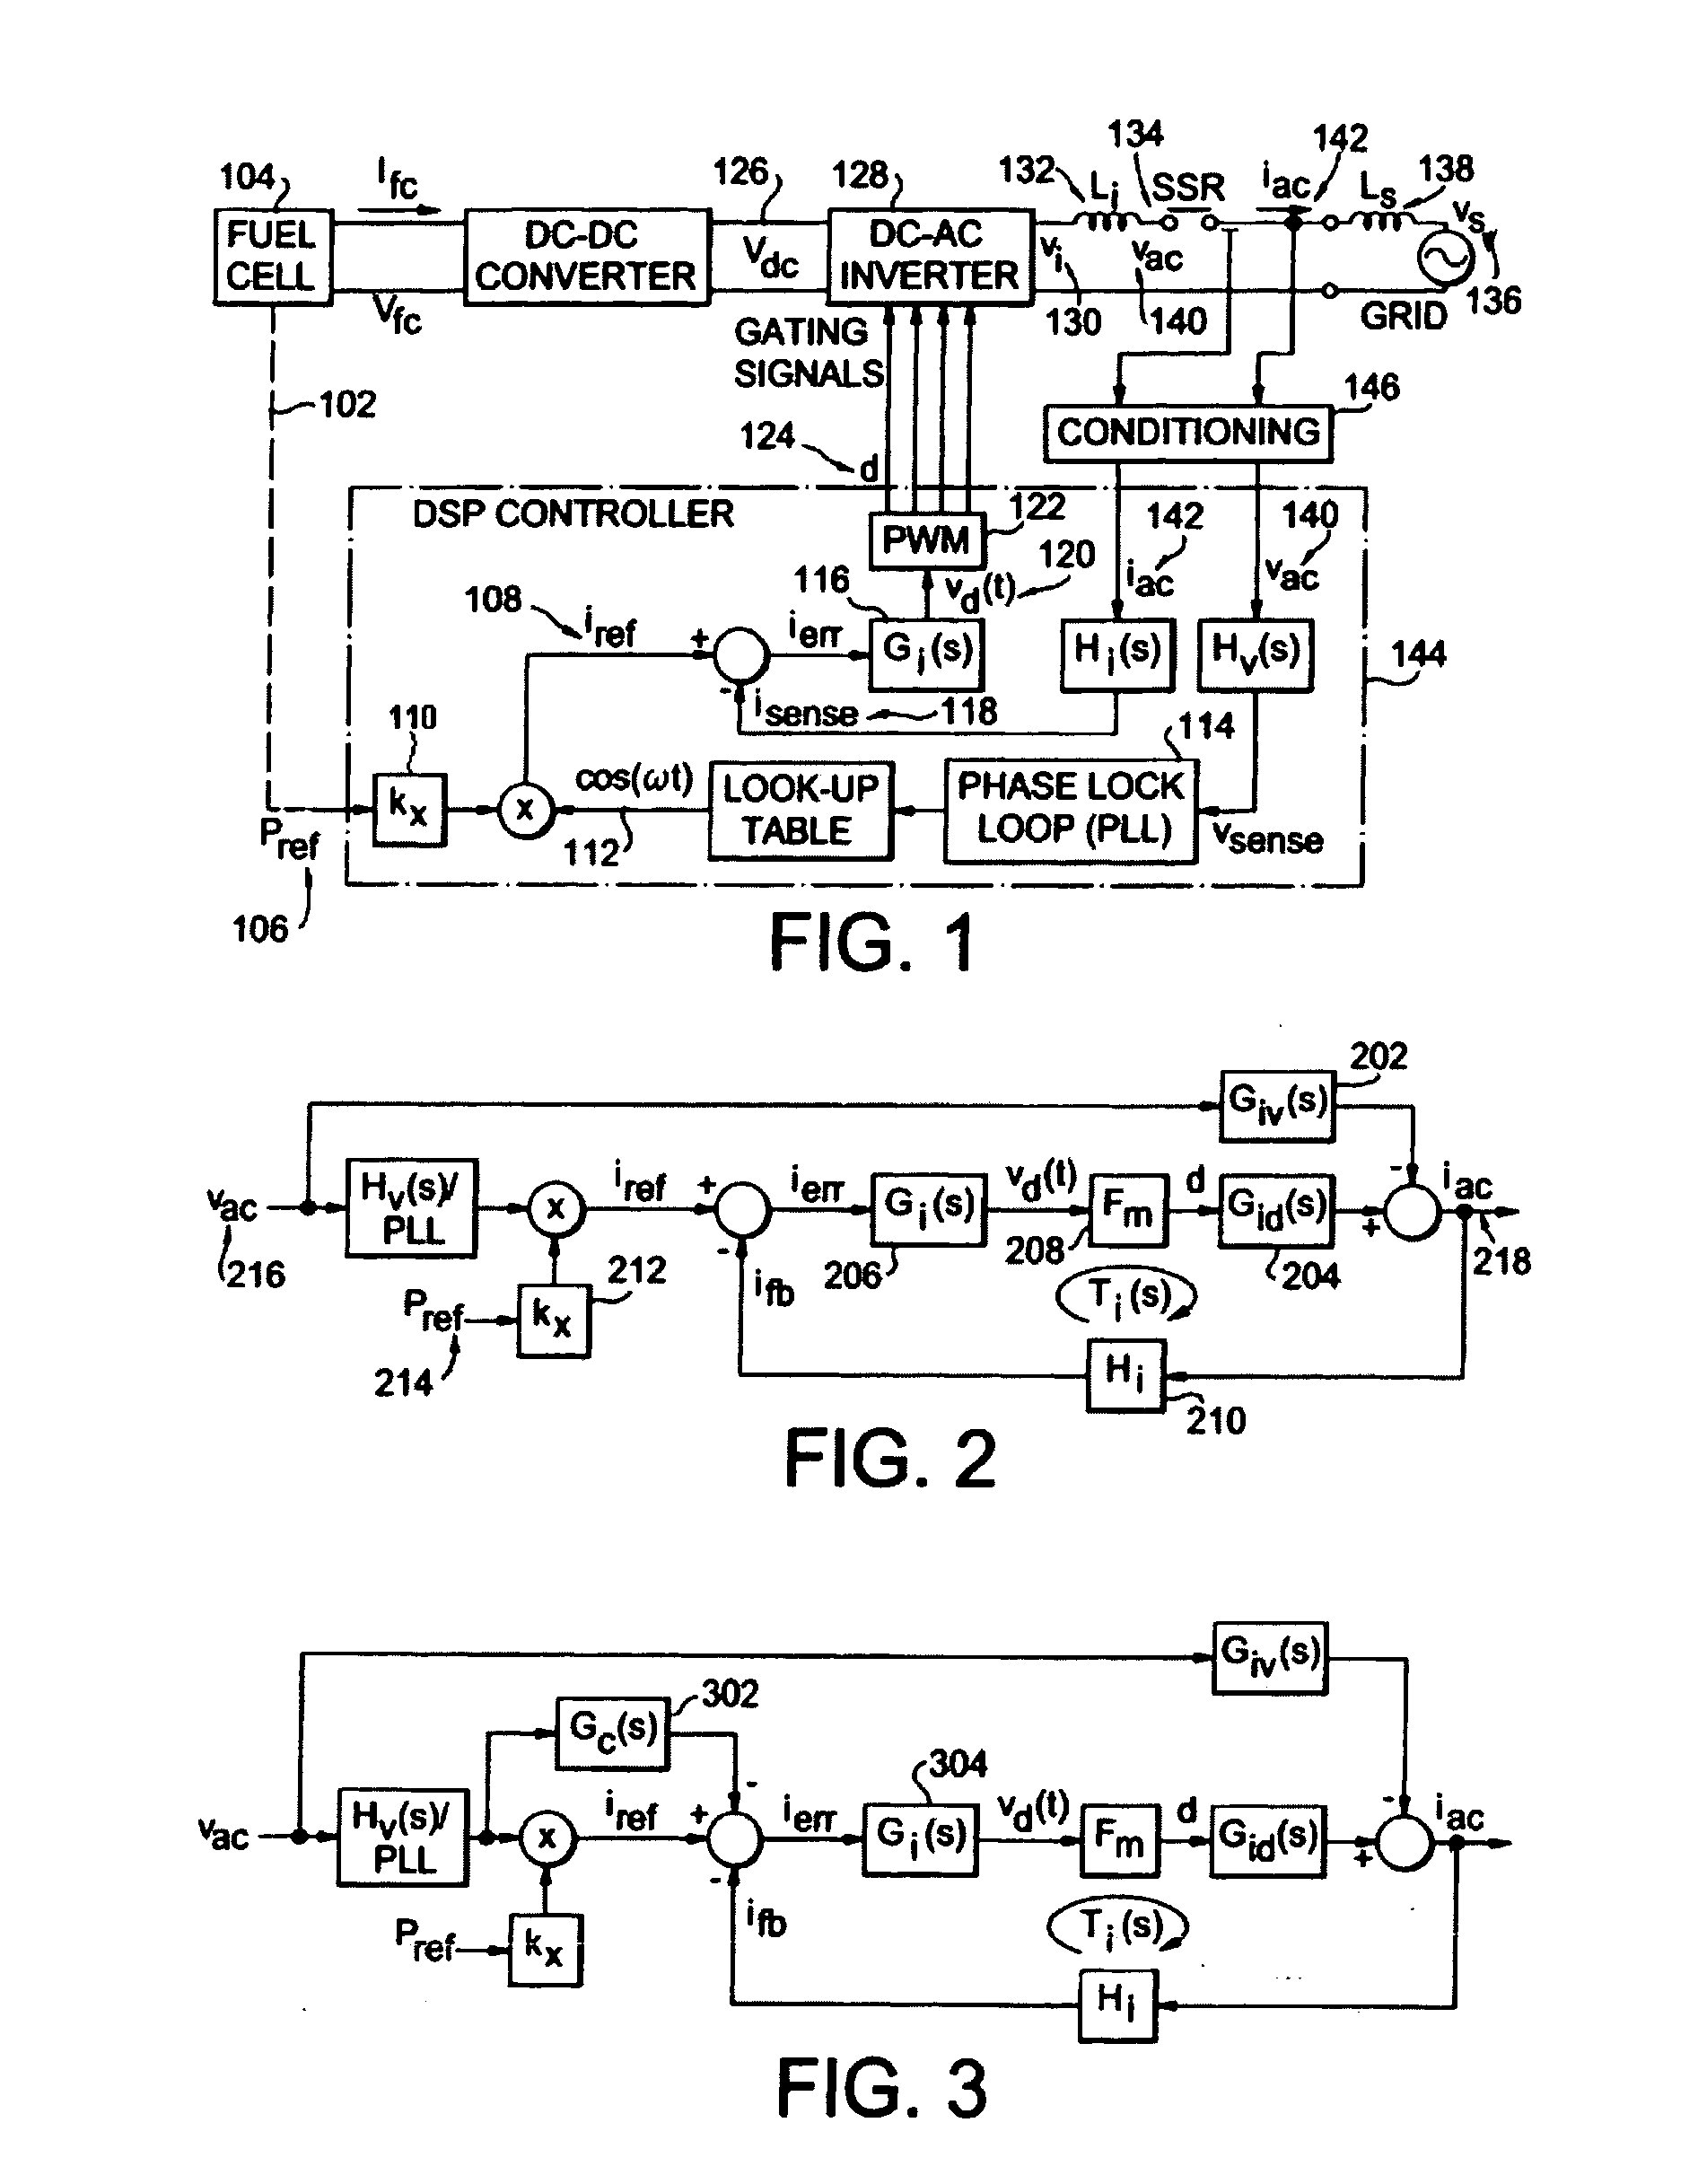 Control system and method for a universal power conditioning system